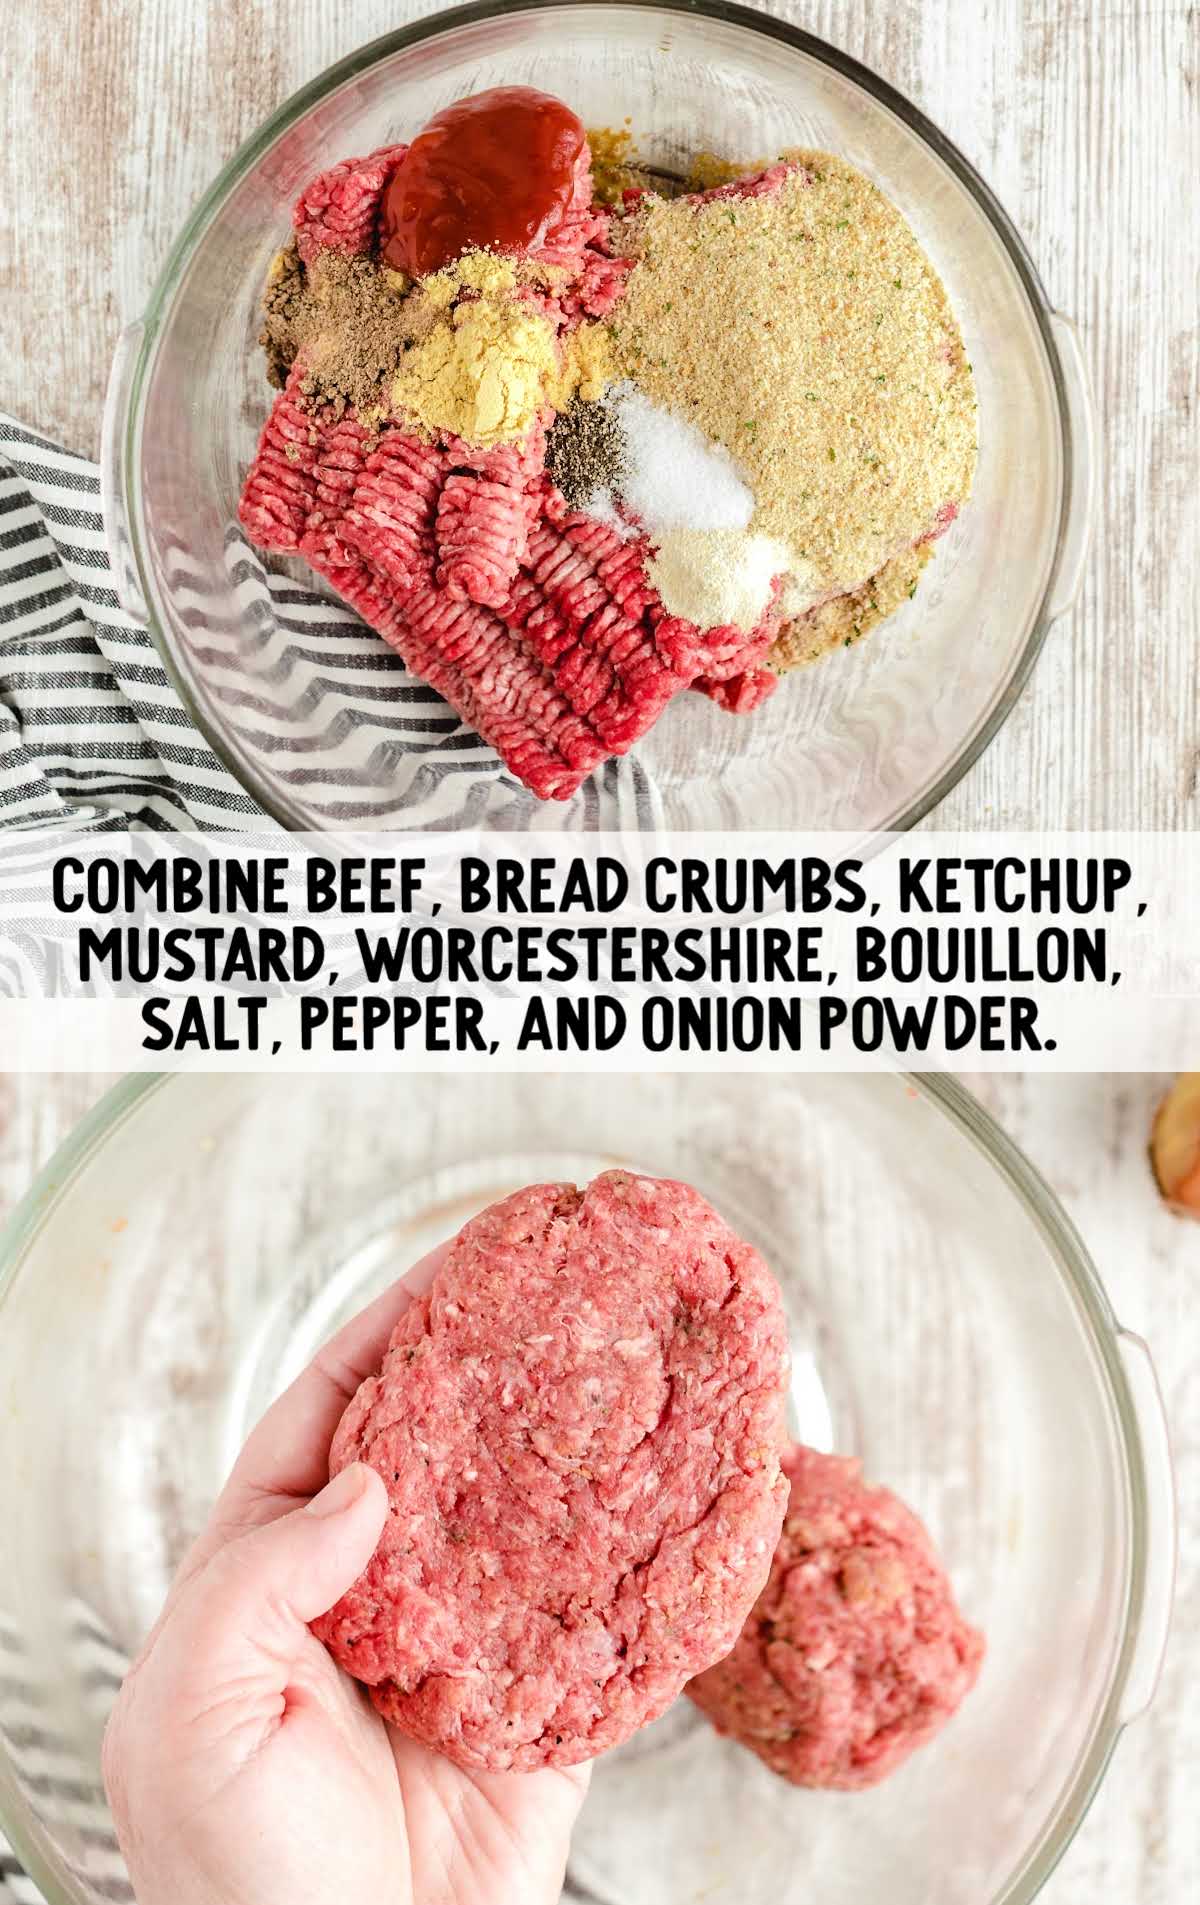 beef, breadcrumbs, ketchup, mustard, Worcestershire, bouillon, salt, pepper, and onion powder combined in a bowl